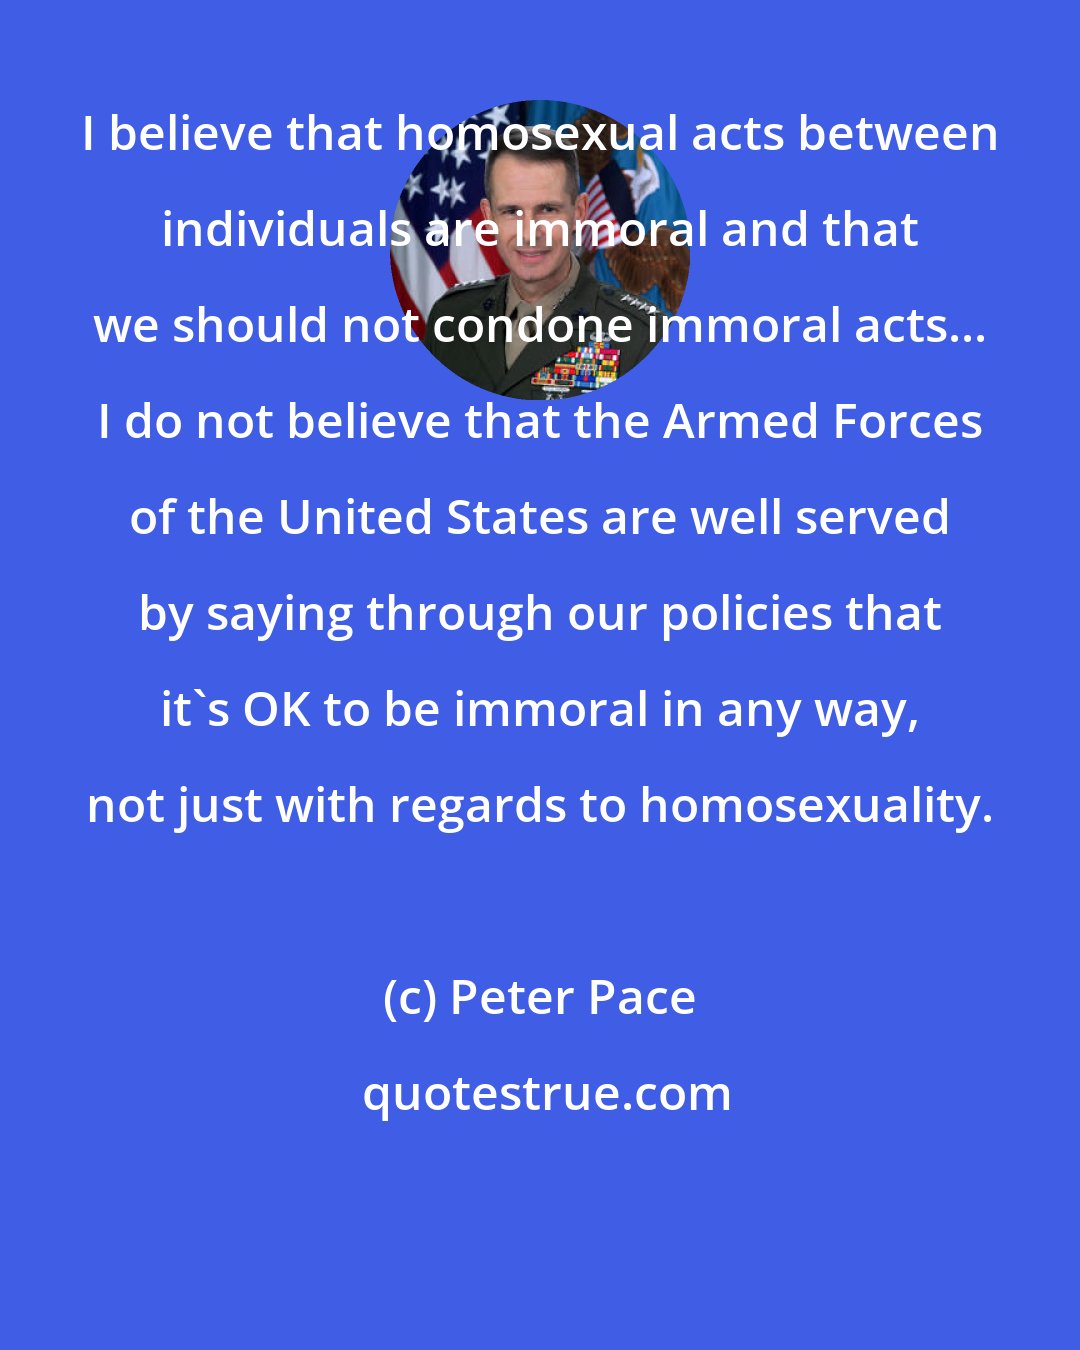 Peter Pace: I believe that homosexual acts between individuals are immoral and that we should not condone immoral acts... I do not believe that the Armed Forces of the United States are well served by saying through our policies that it's OK to be immoral in any way, not just with regards to homosexuality.